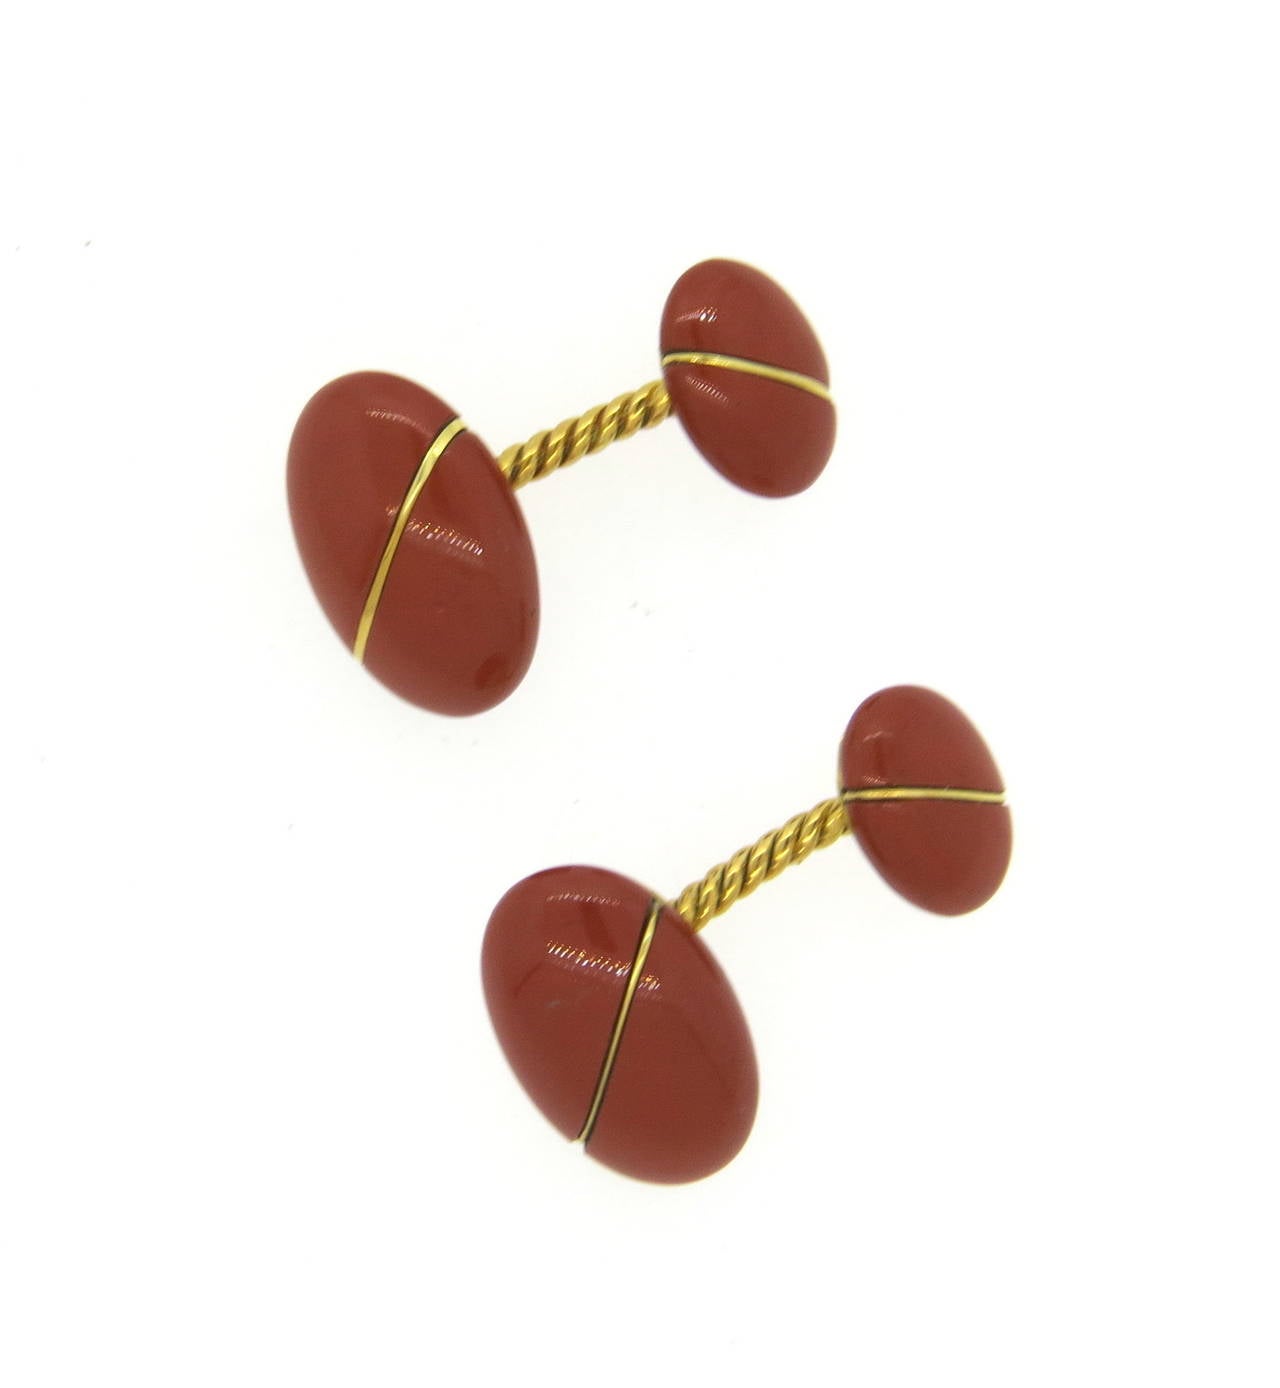 1960s Tiffany & Co. Jasper Gold Cufflinks In Excellent Condition For Sale In Lambertville, NJ